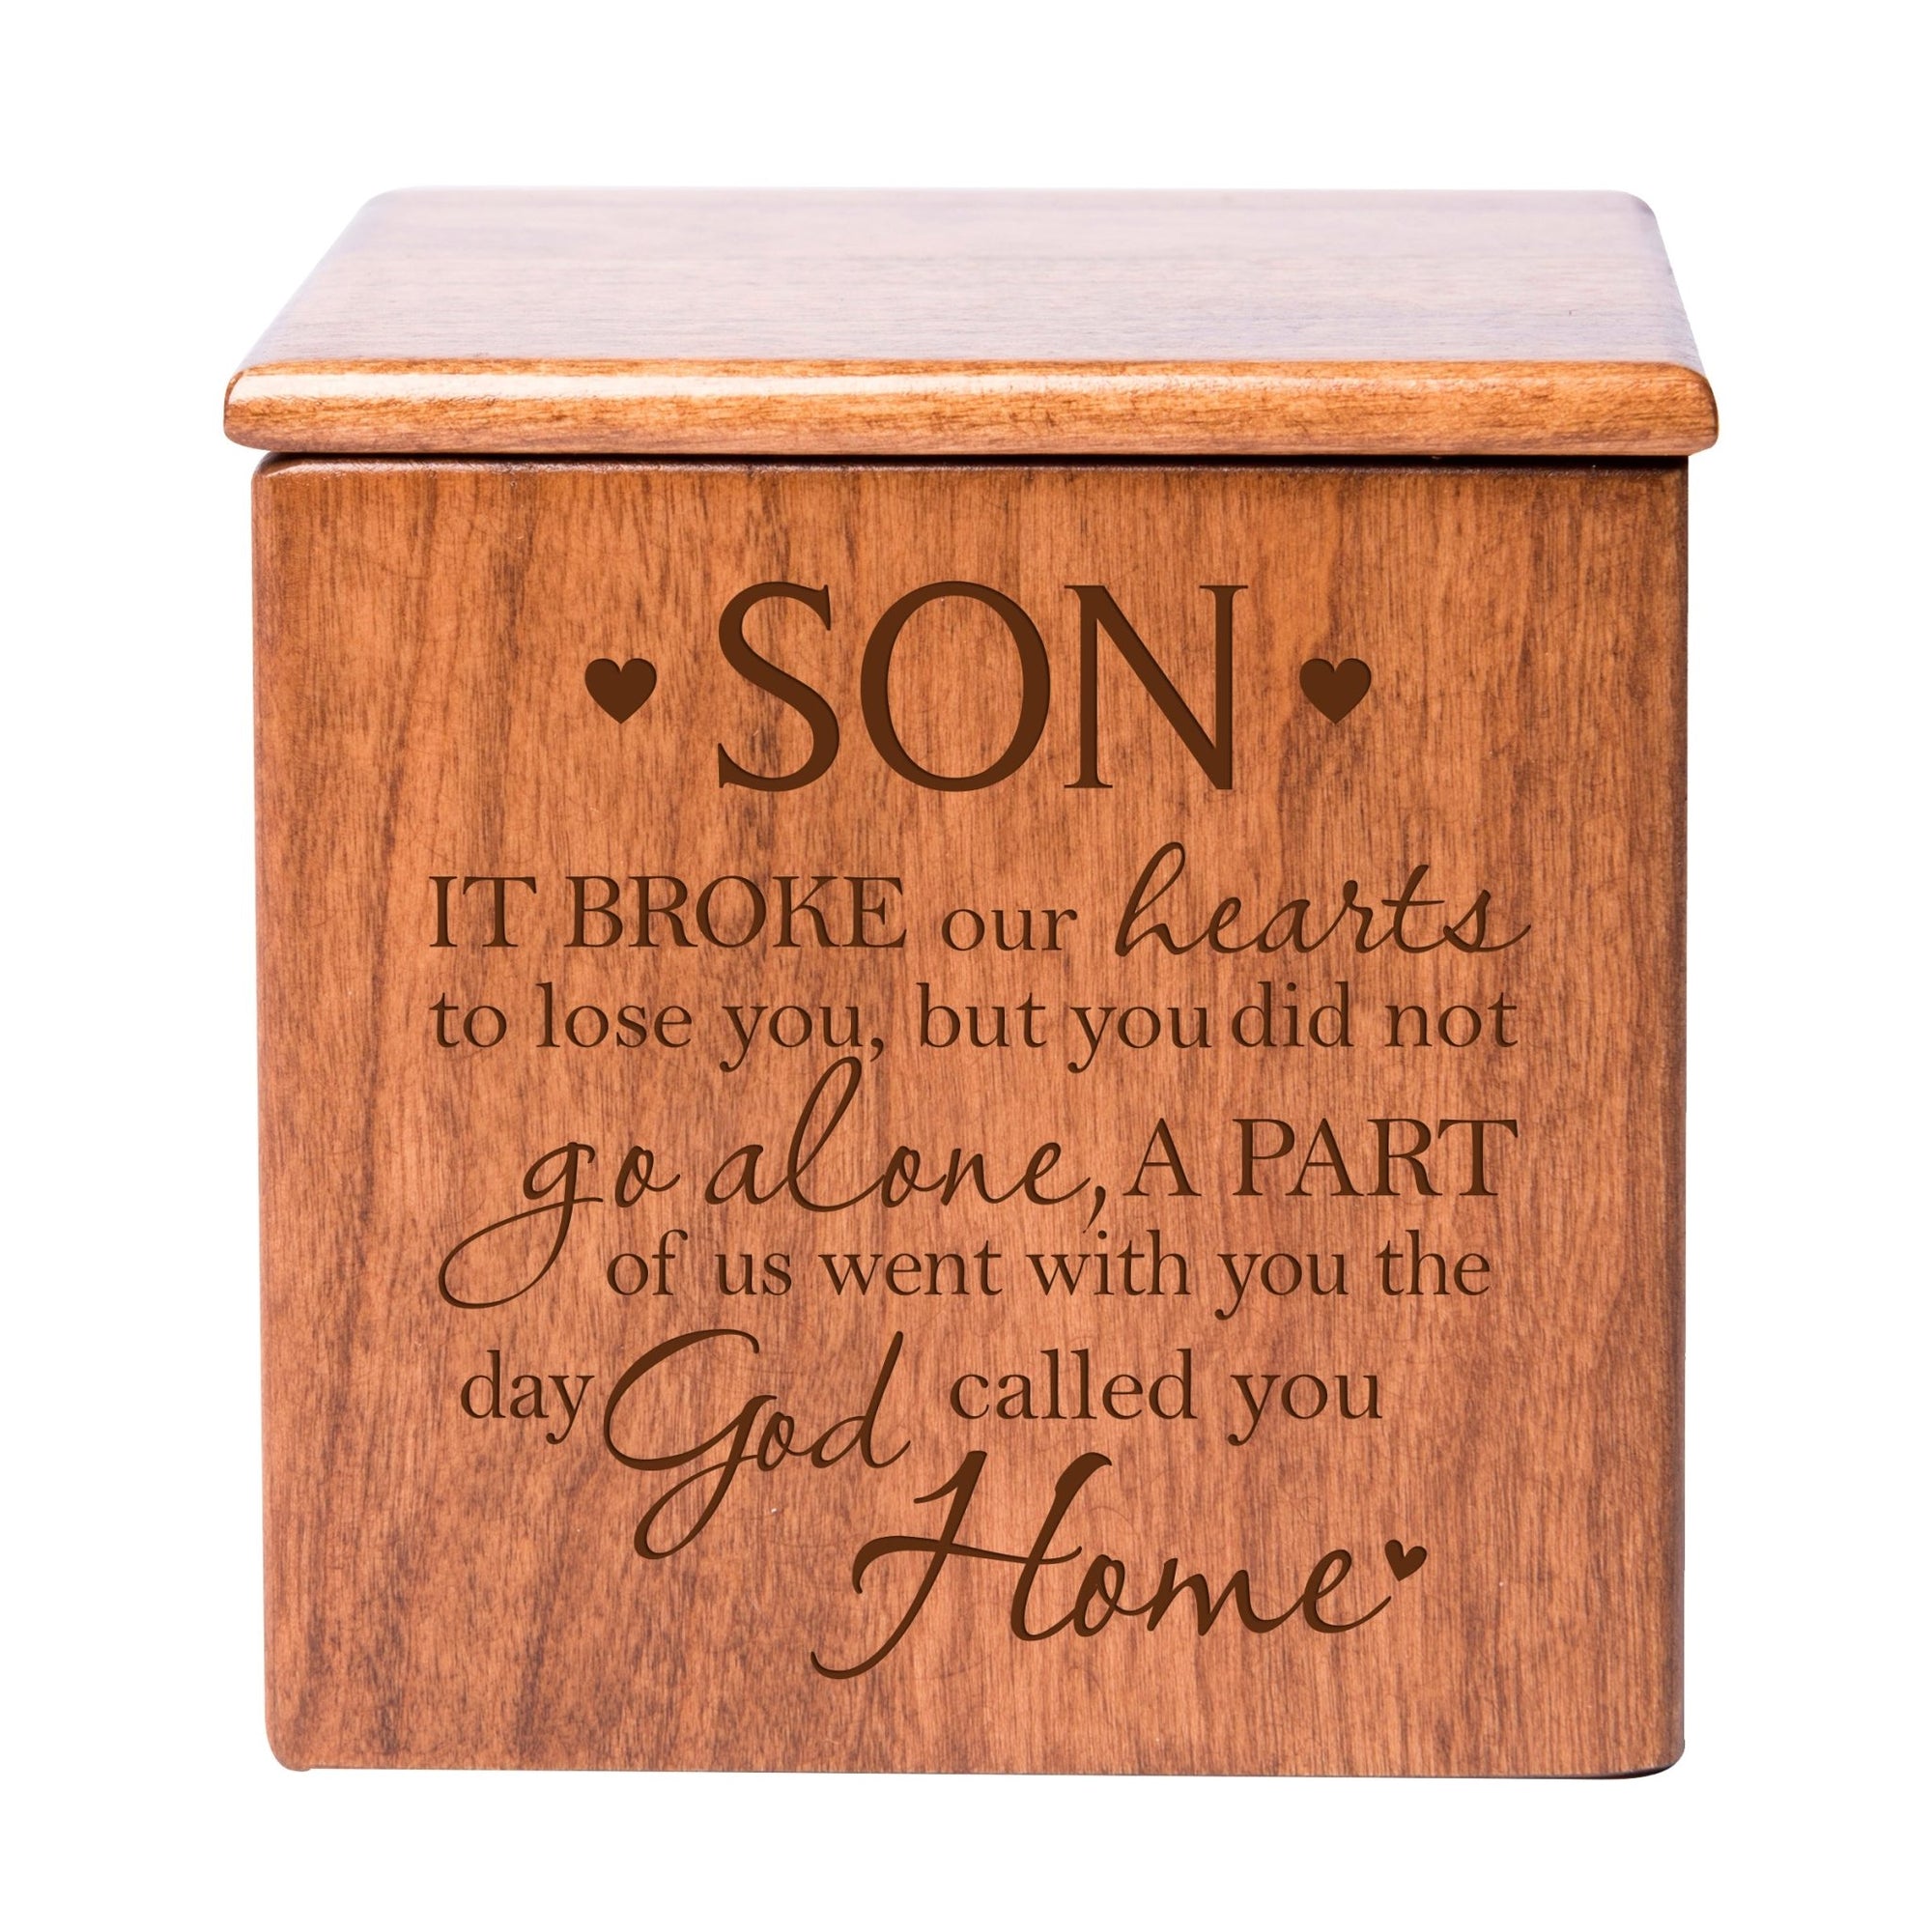 Modern Inspirational Memorial Wooden Cremation Urn Box 4.5x4.5in Holds 49 Cu Inches Of Human Ashes (It Broke Our Hearts Son) Funeral and Commemorative Keepsake - LifeSong Milestones